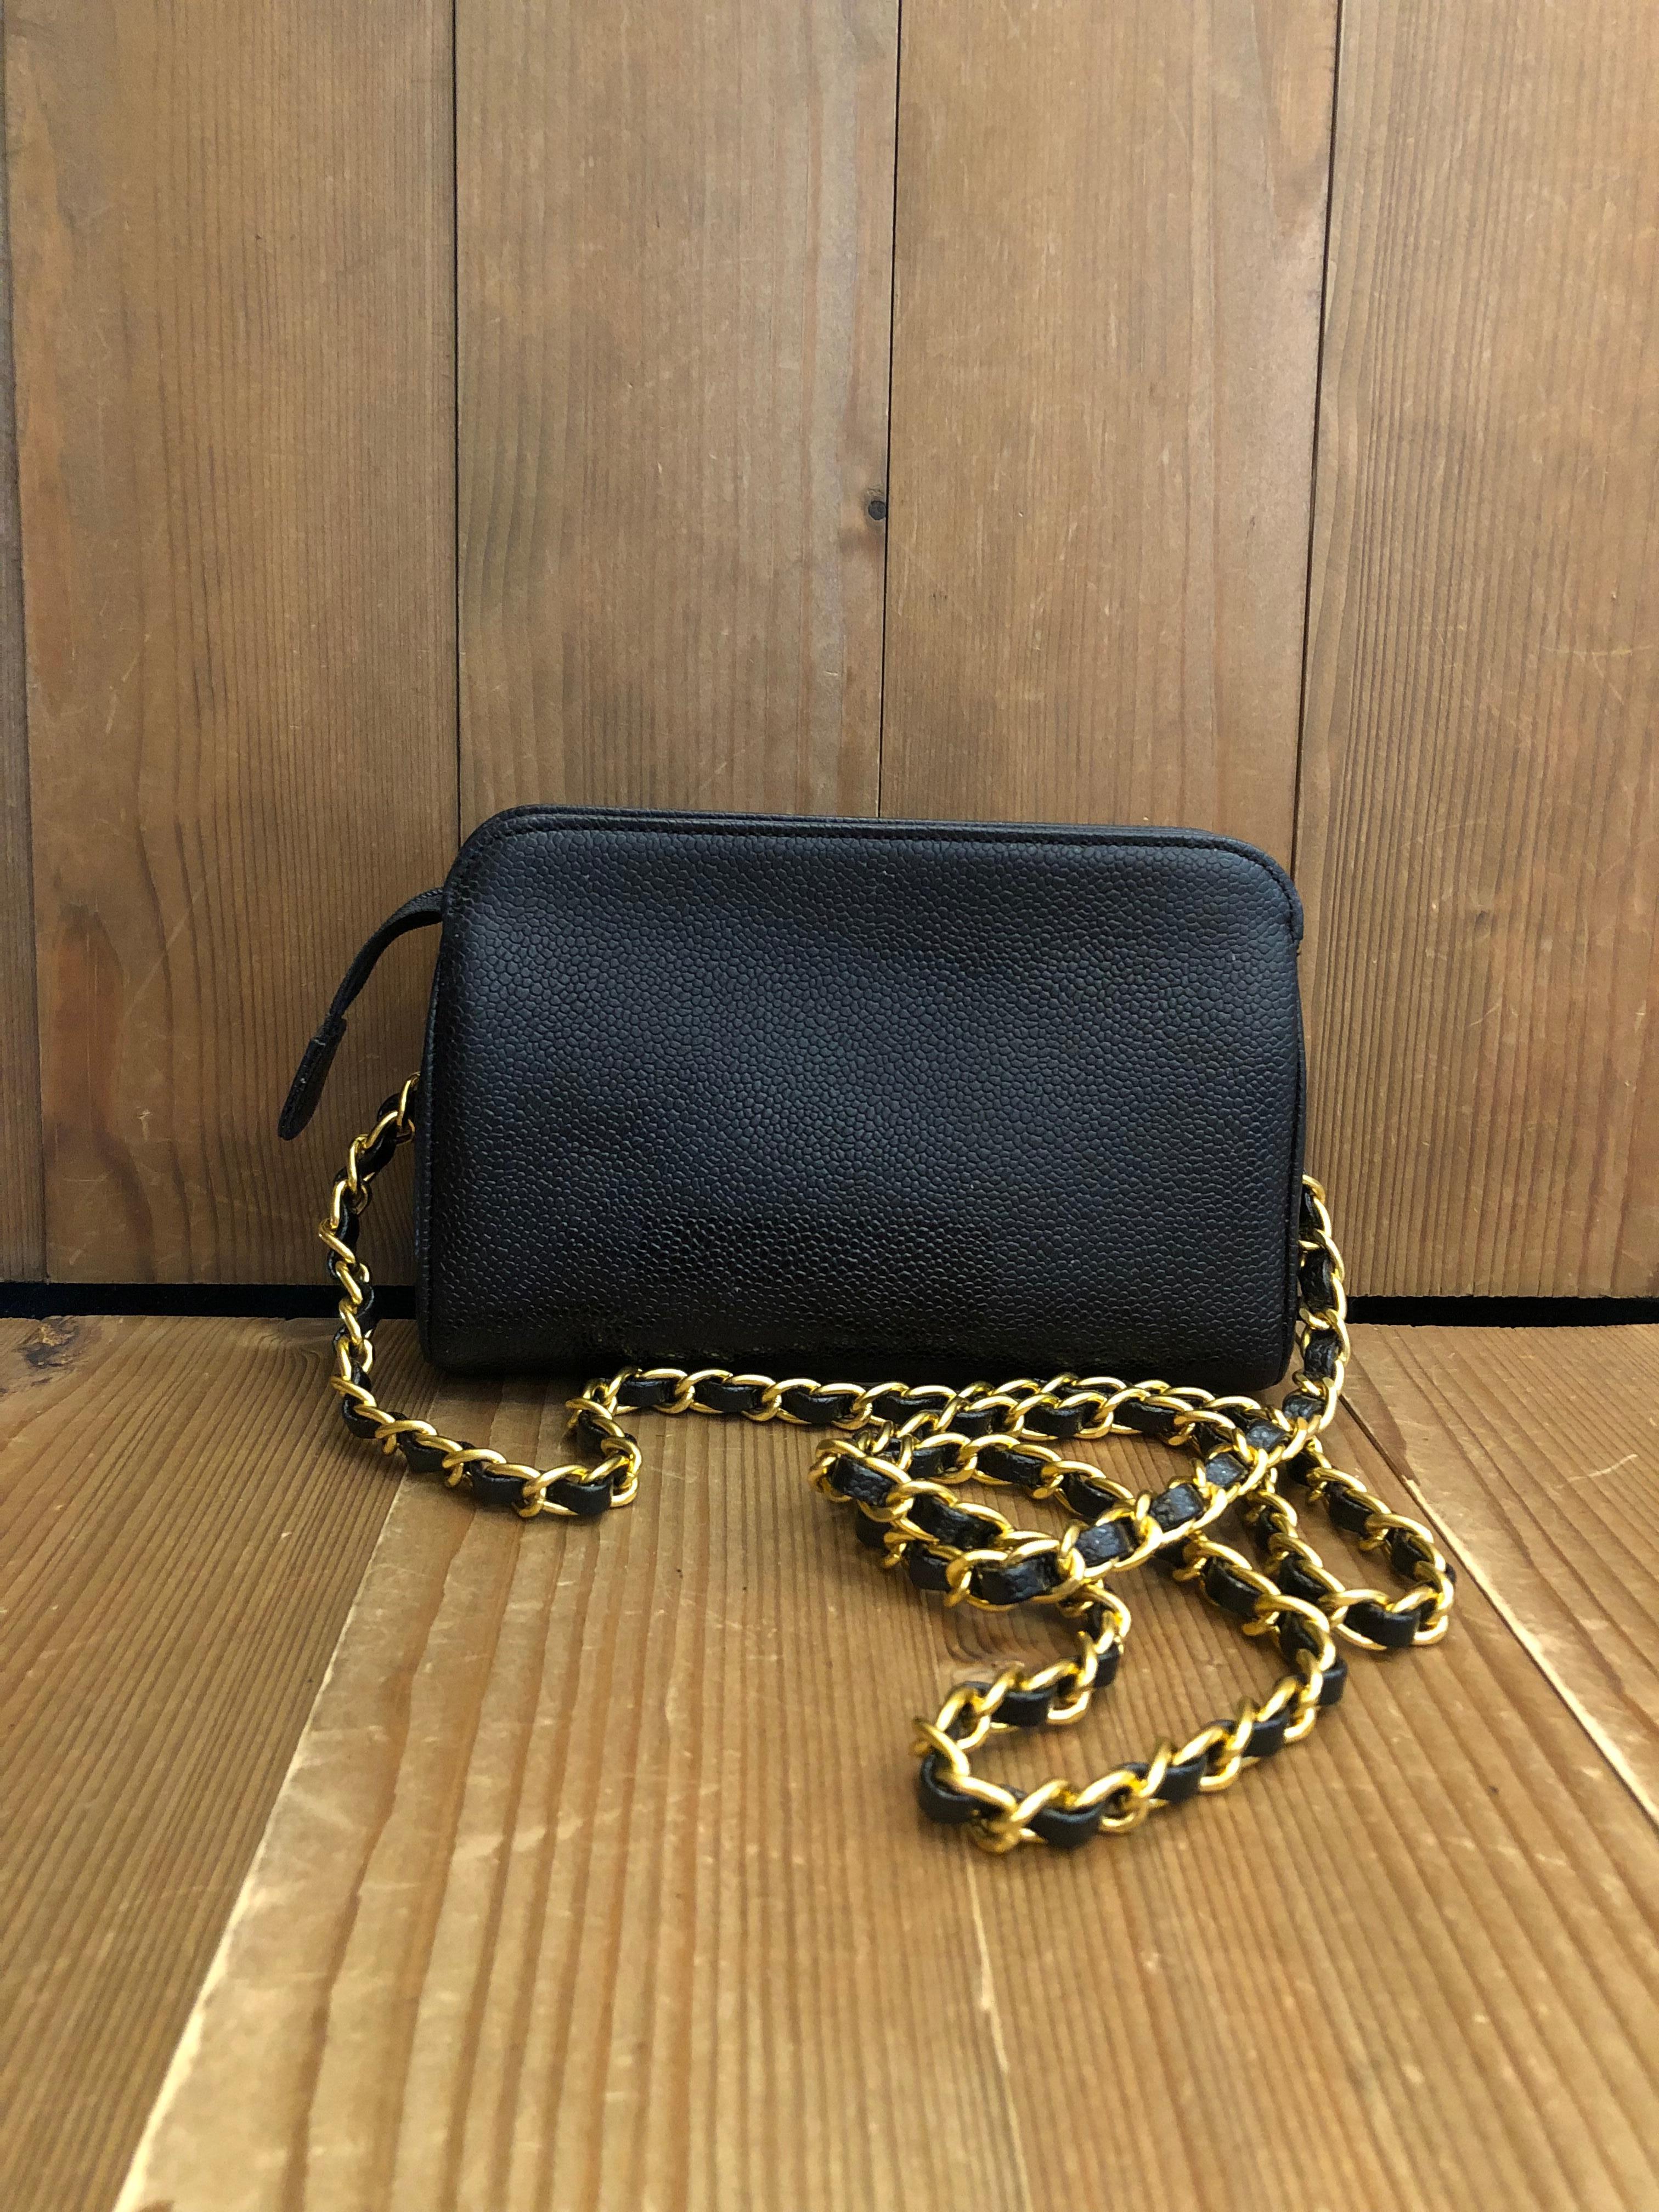 Vintage CHANEL Black Caviar Leather Pouch Bag Clutch (Altered) 2